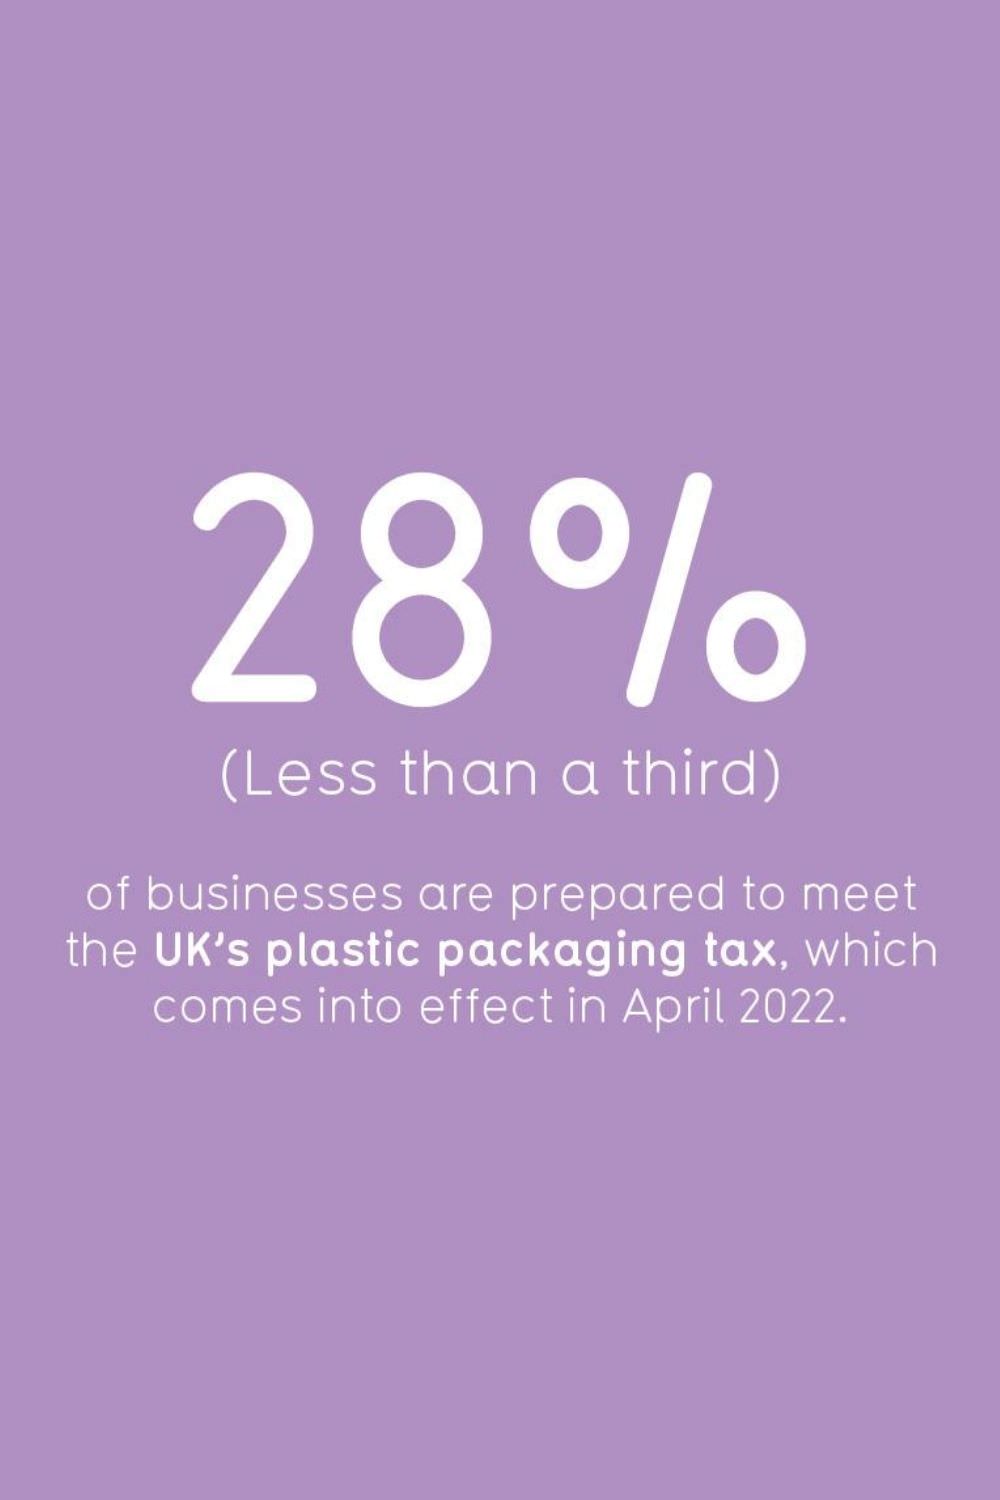 Purple background with statistic 28% of businesses are prepared to meet the UK's plastic tax which comes into effect in April 2022.